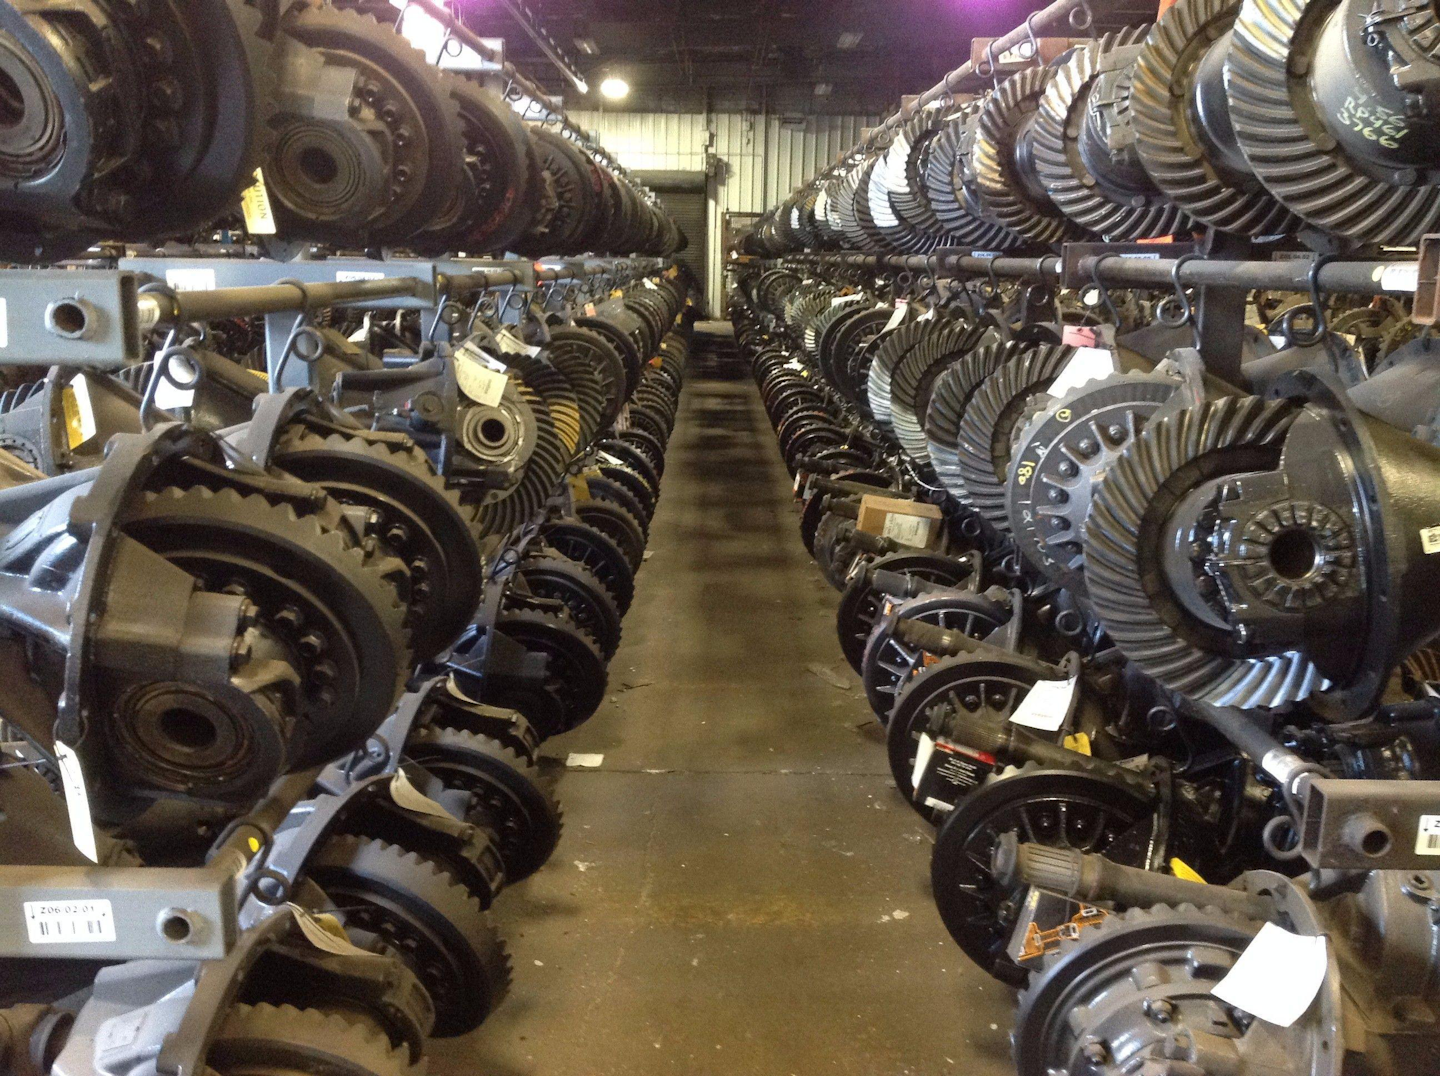 A look inside of one of LKQ’s parts warehouses.